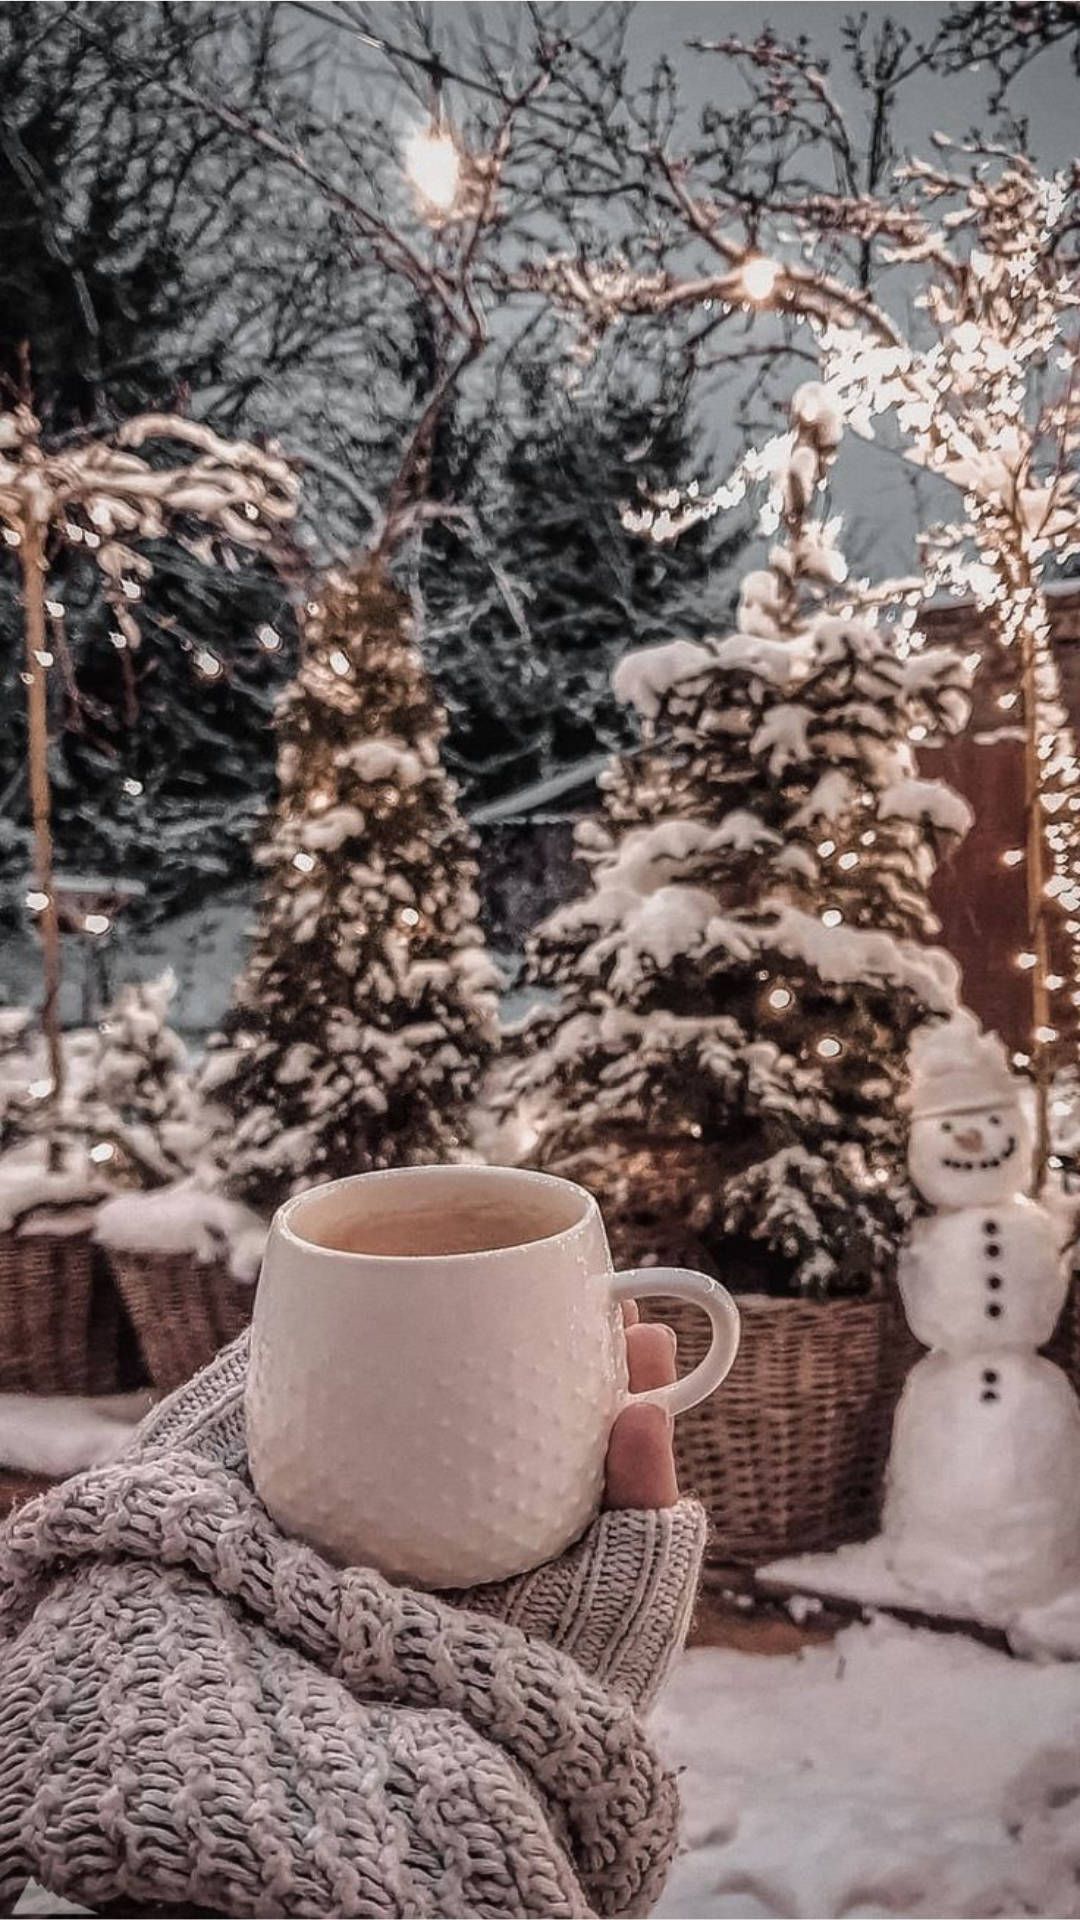 A person holding up their cup of coffee in the snow - Cozy